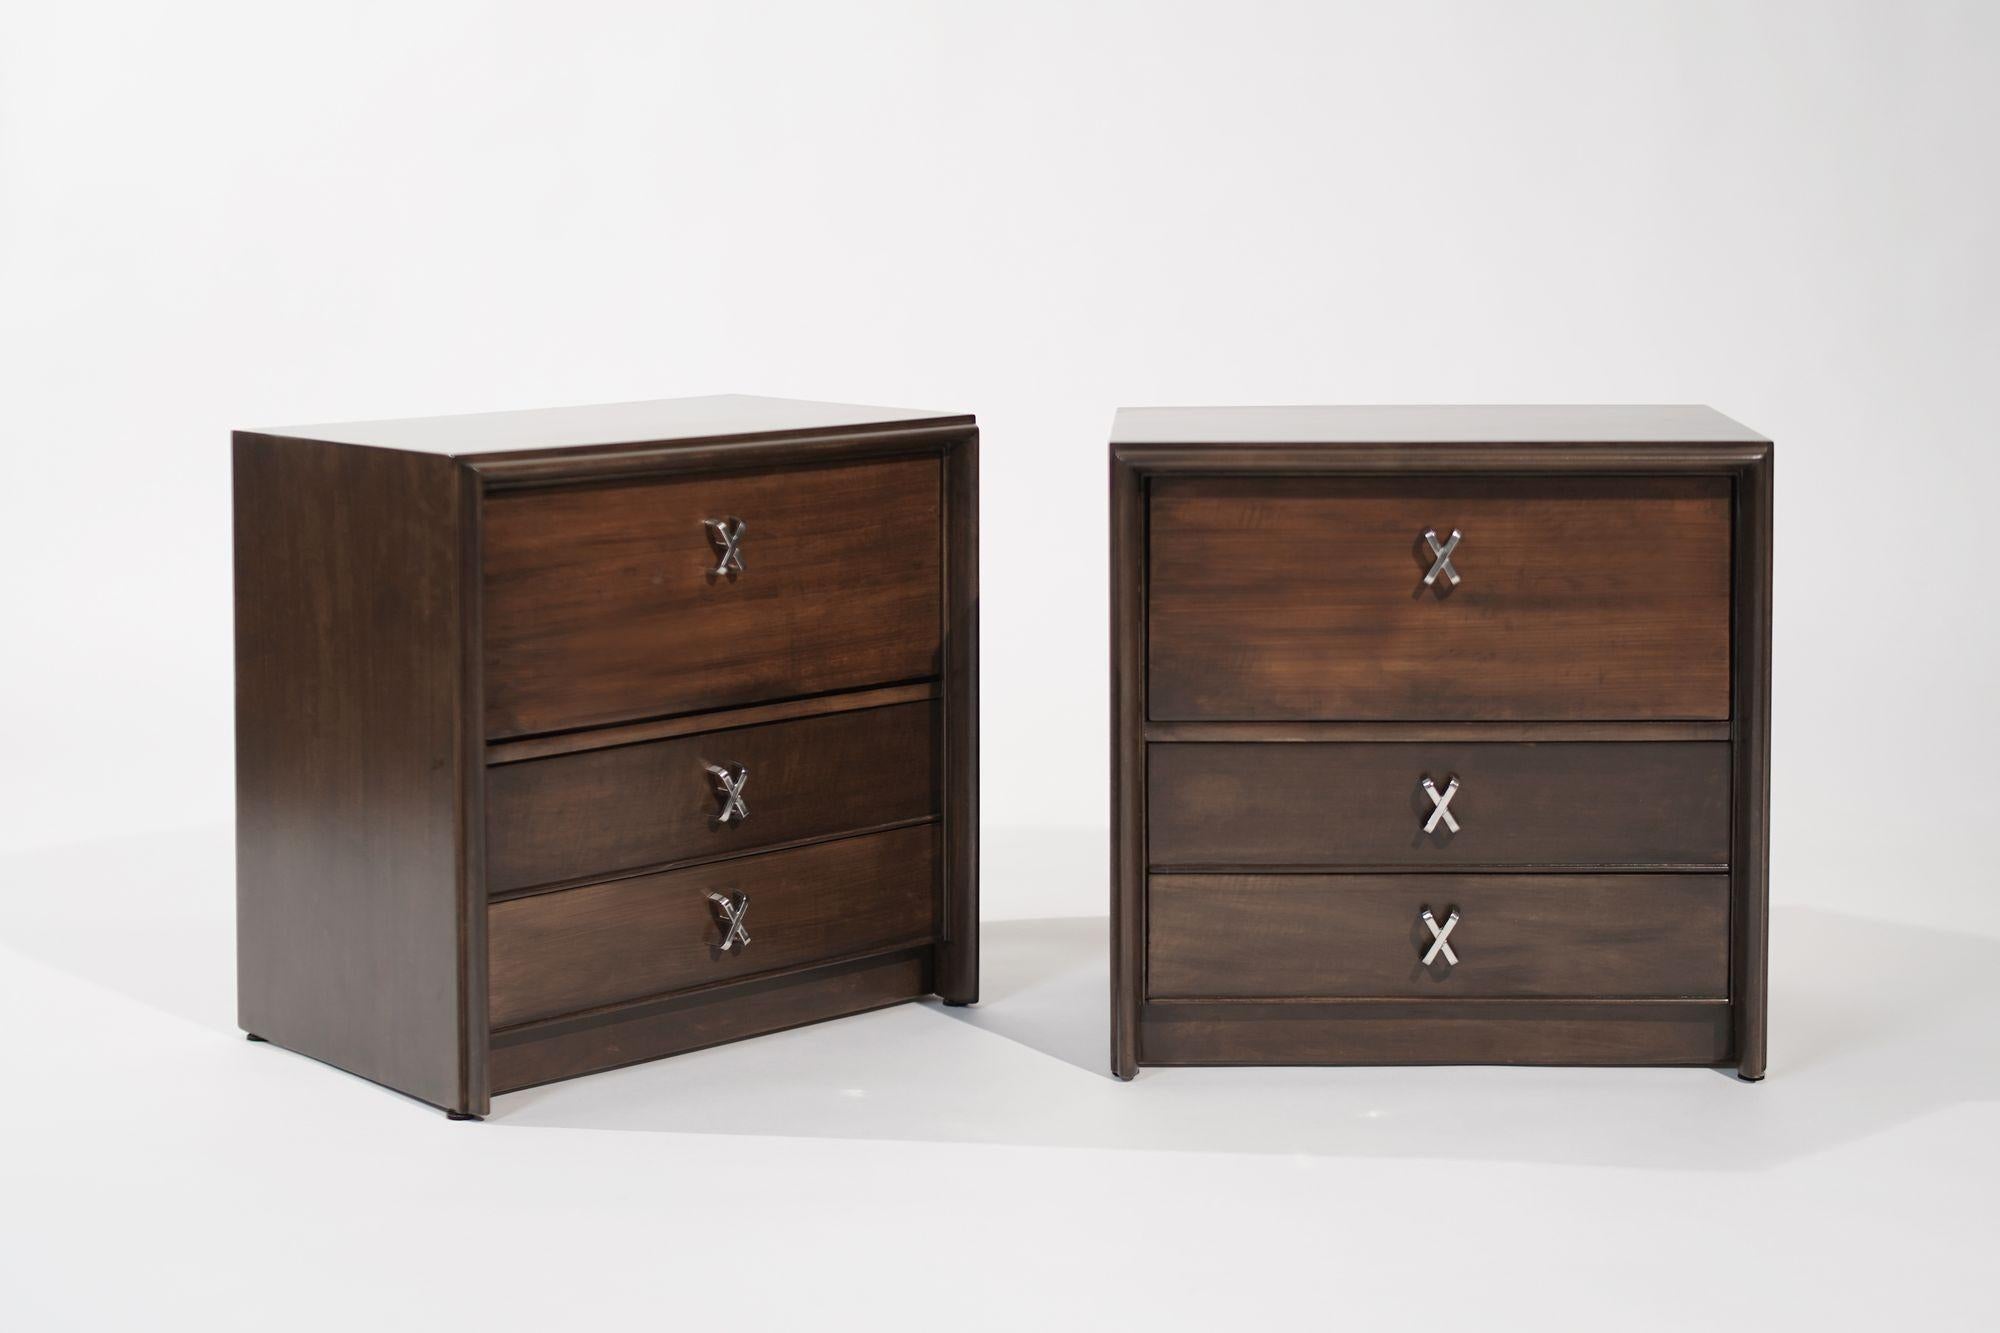 Meticulously restored Vintage Nightstands by Paul Frankl for Johnson Furniture, circa 1950s. These mid-century gems feature a drop-down door storage shelf and two drawers, each adorned with x-shaped nickel hardware. Blending iconic design with